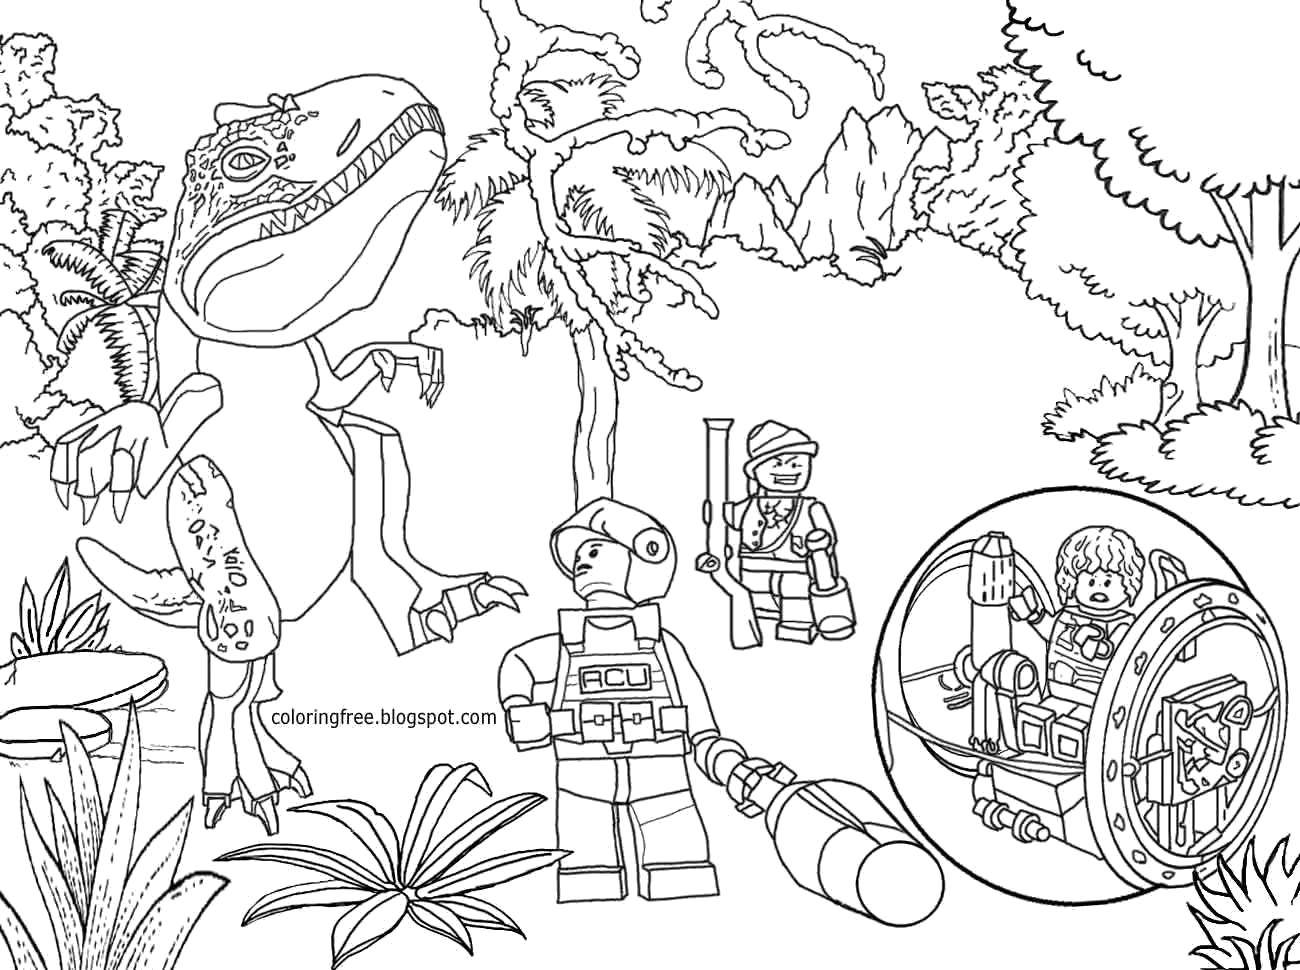 Coloring The world of LEGO. Category LEGO. Tags:  Designer, LEGO.